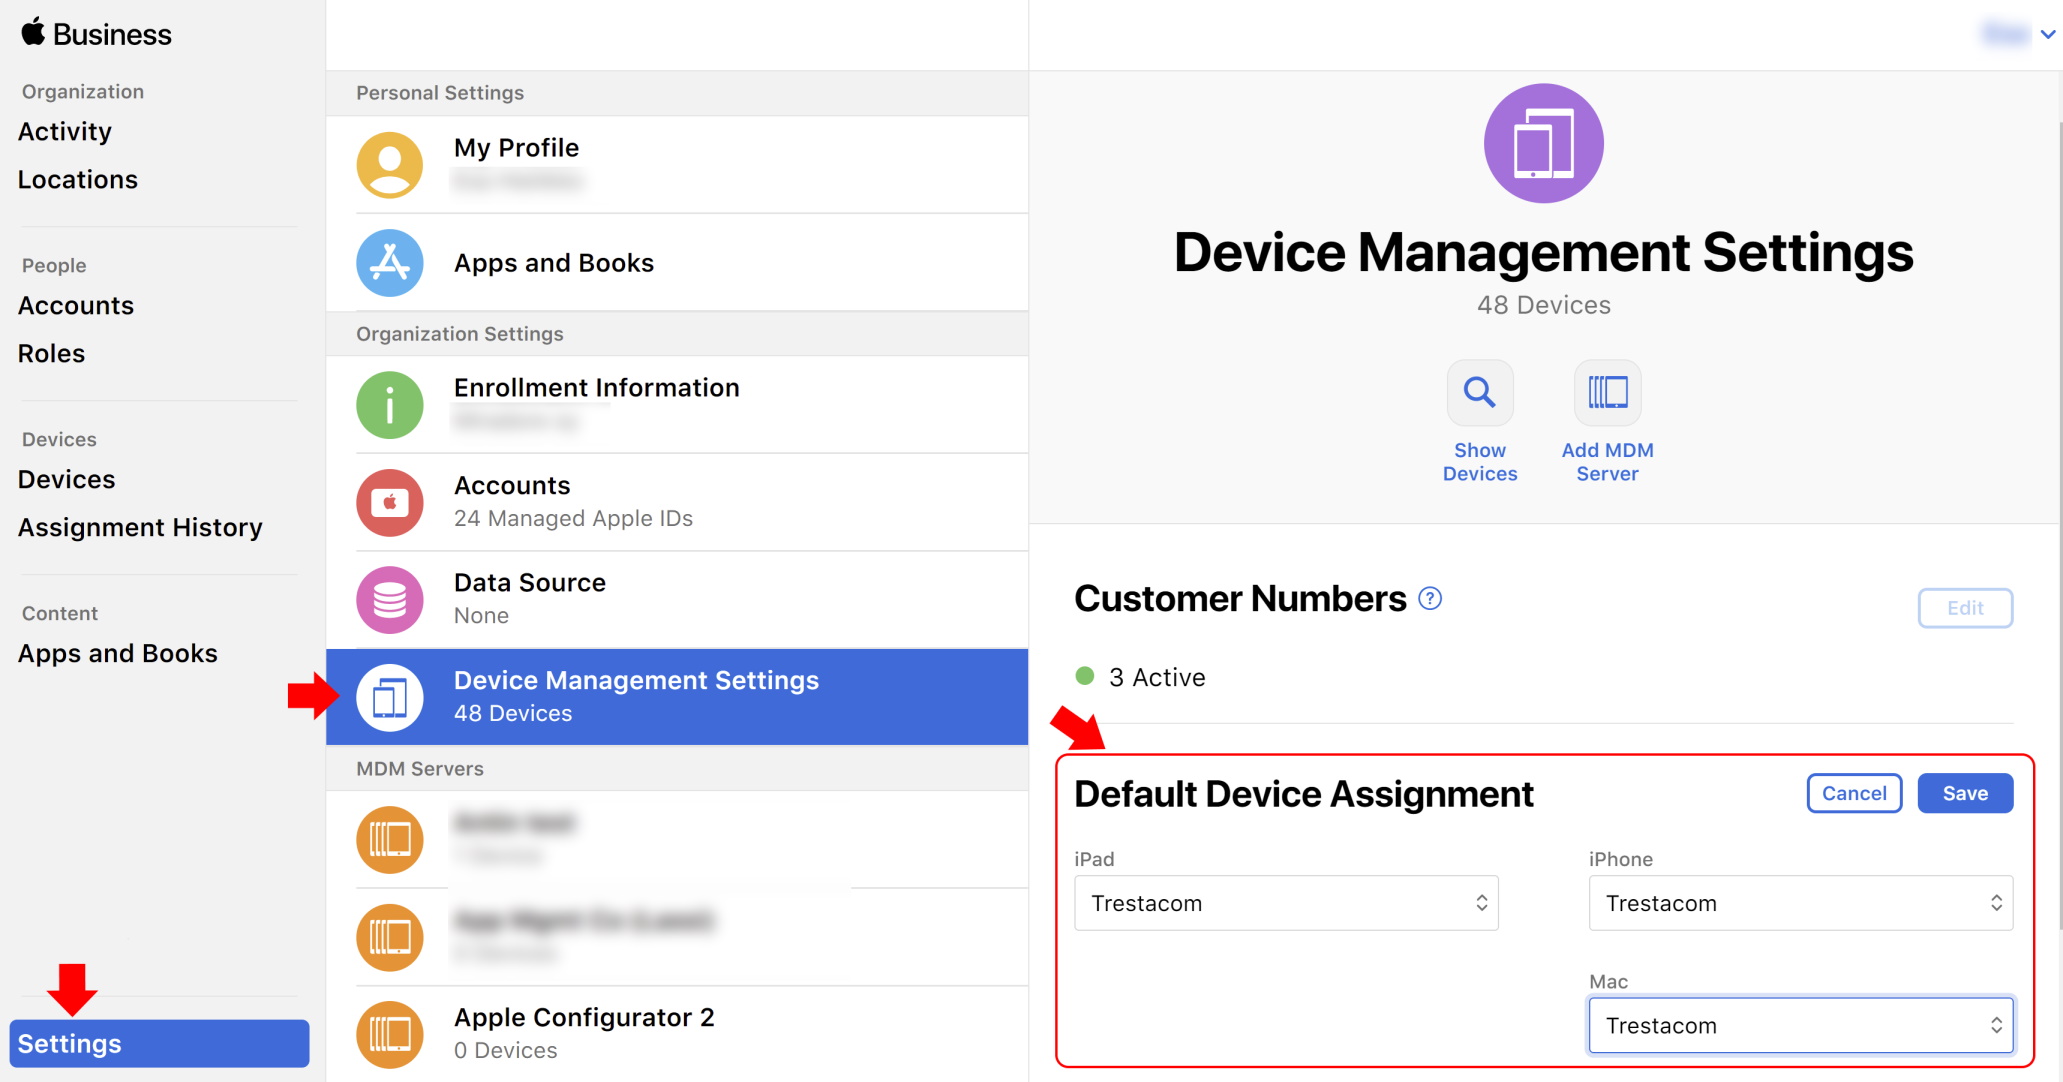 How to set the default device assignment for device types in Apple Business/School Manager.